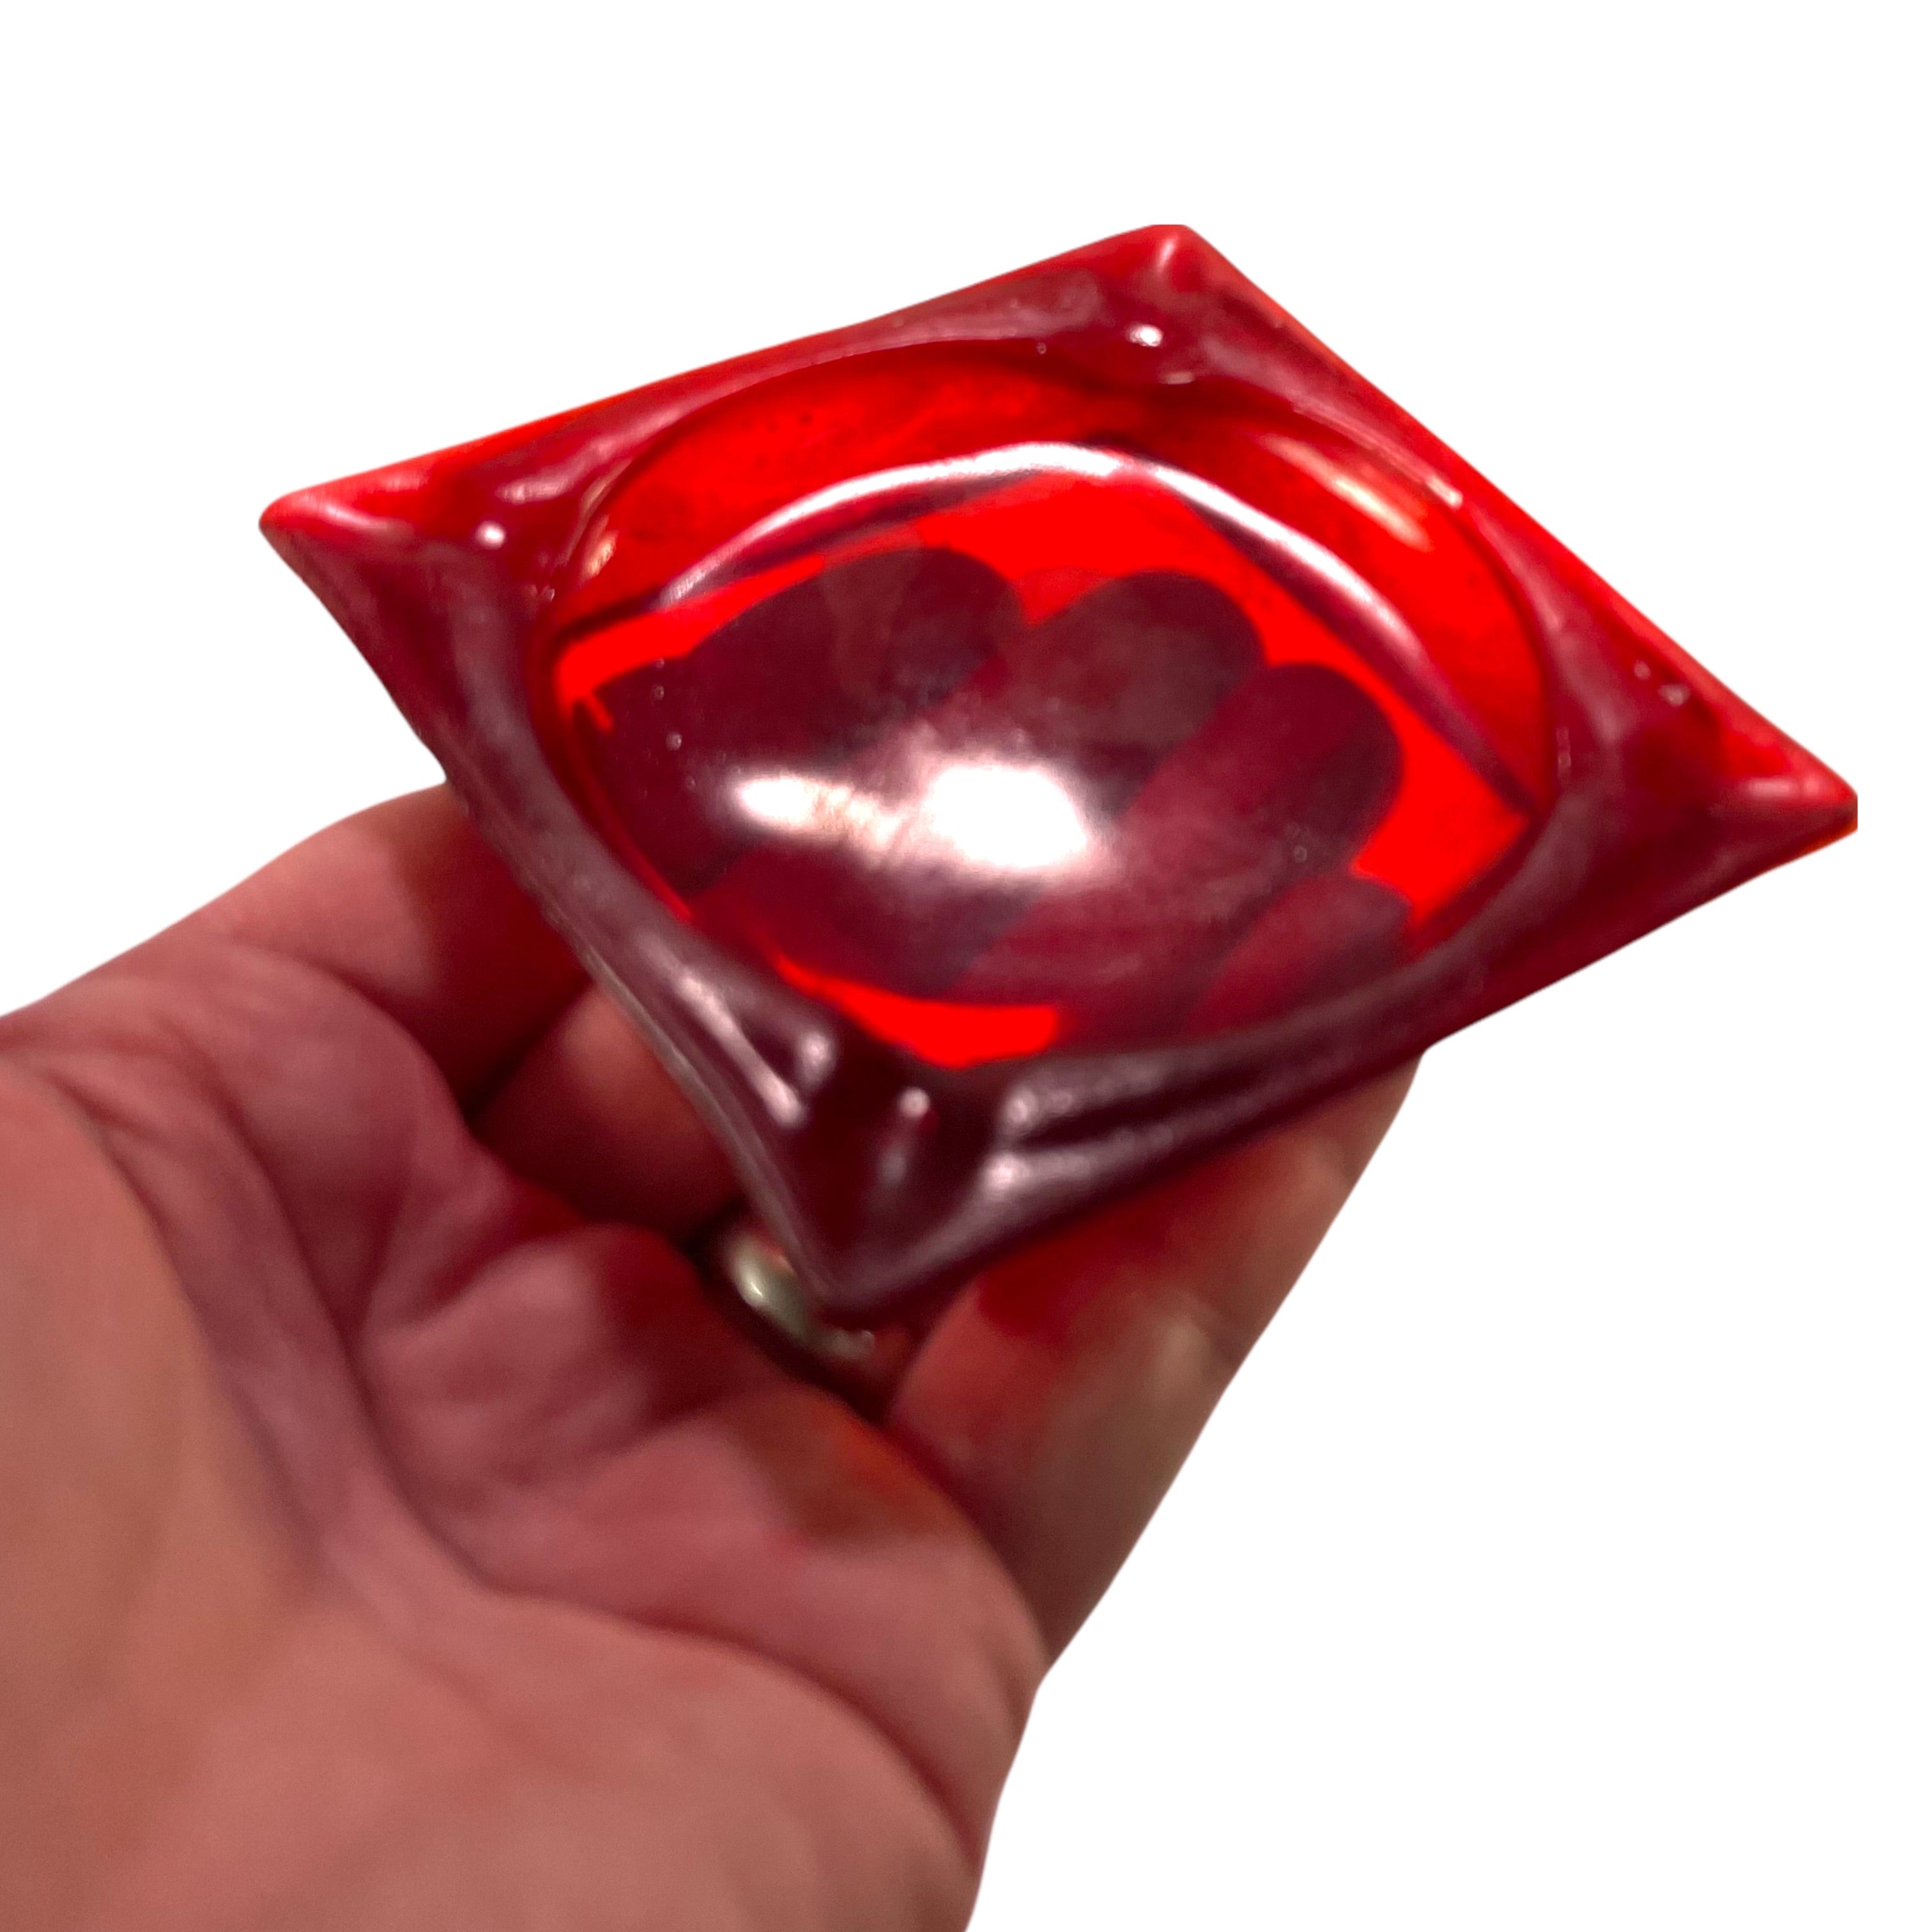 SMASHProps Breakaway Square Ash Tray - RED translucent - Red Translucent